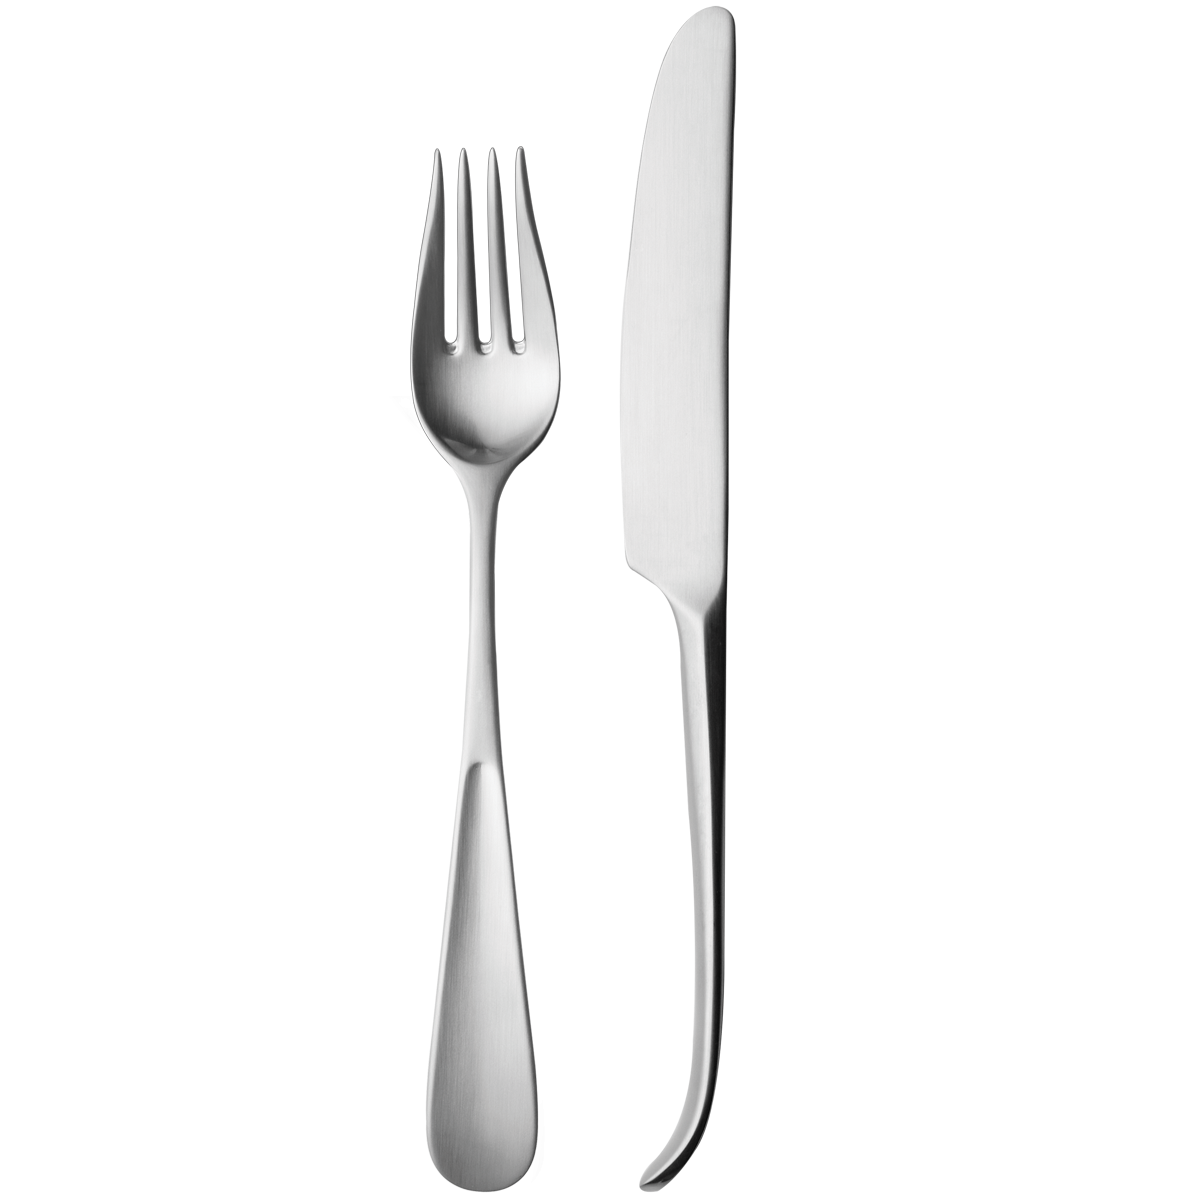 Knife and fork clipart synkee